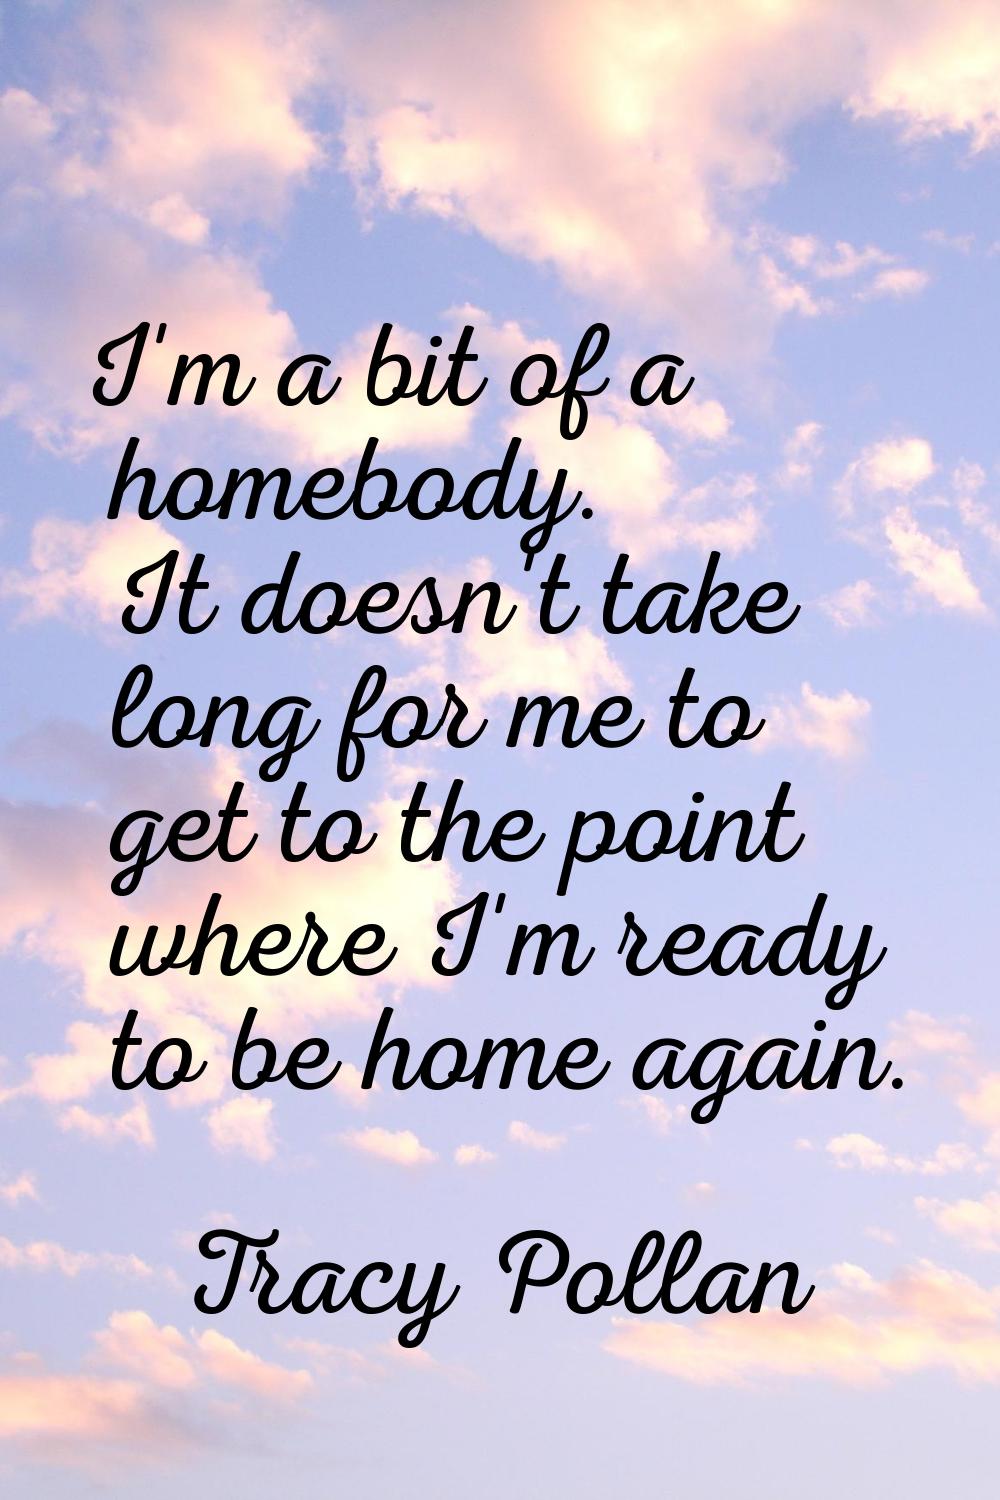 I'm a bit of a homebody. It doesn't take long for me to get to the point where I'm ready to be home